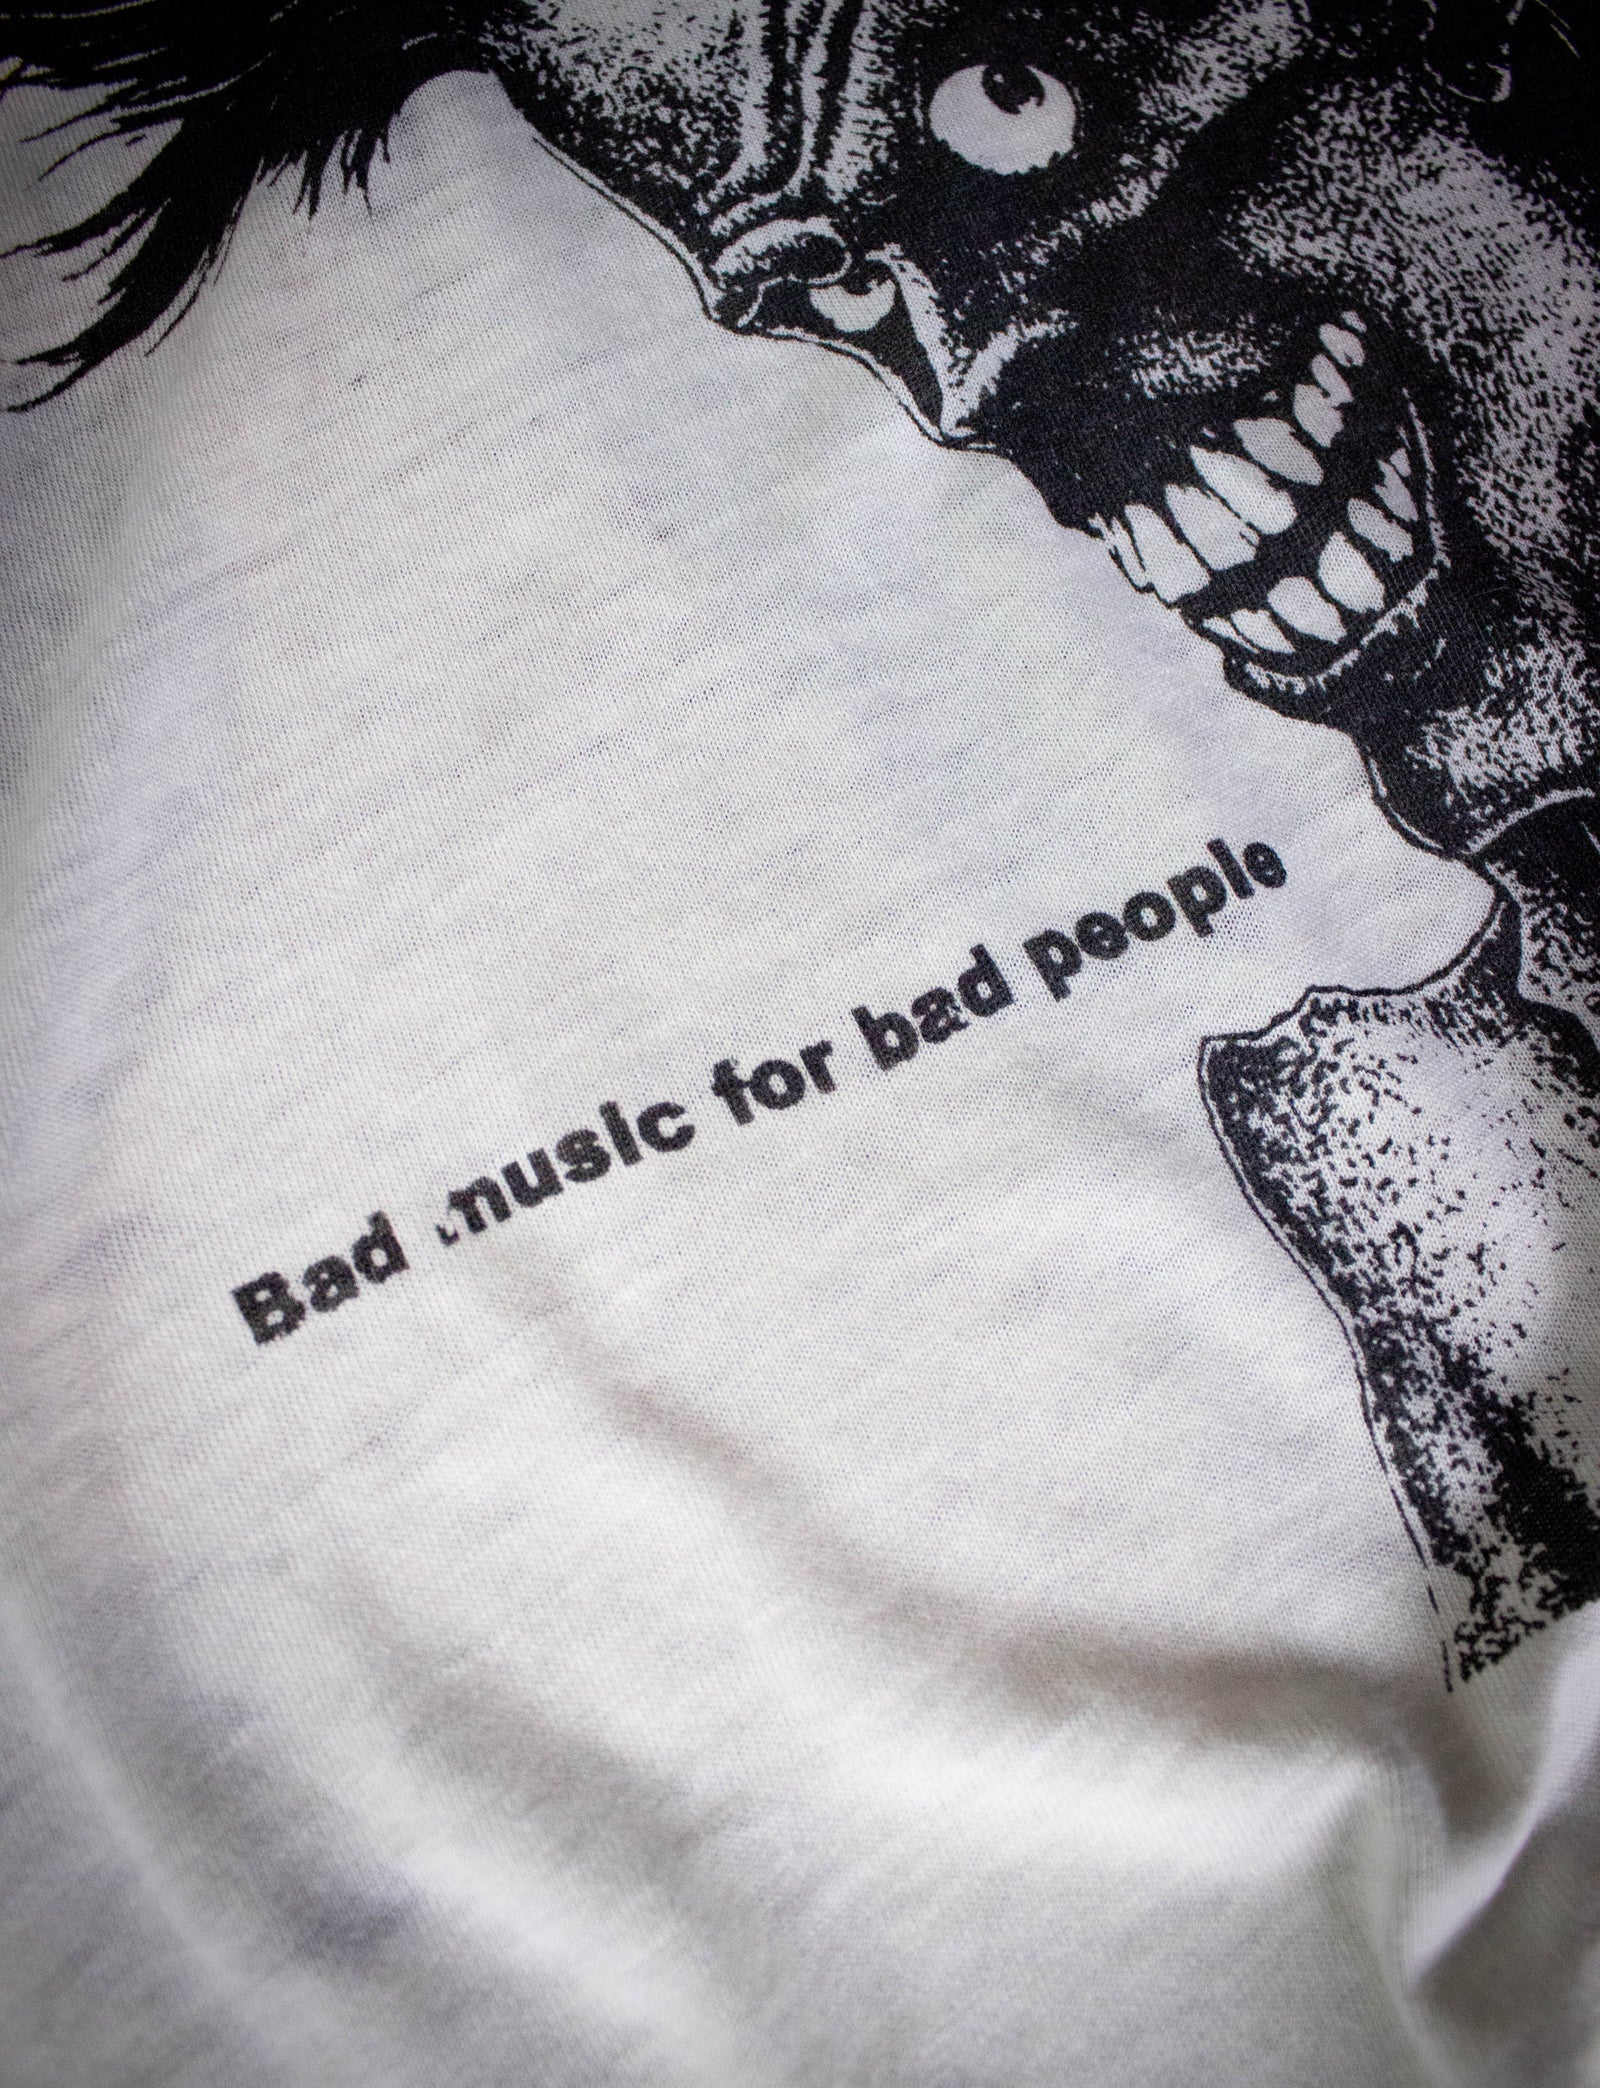 Vintage 80s Cramps Bad Music for Bad People Cut Off Concert T Shirt White Large